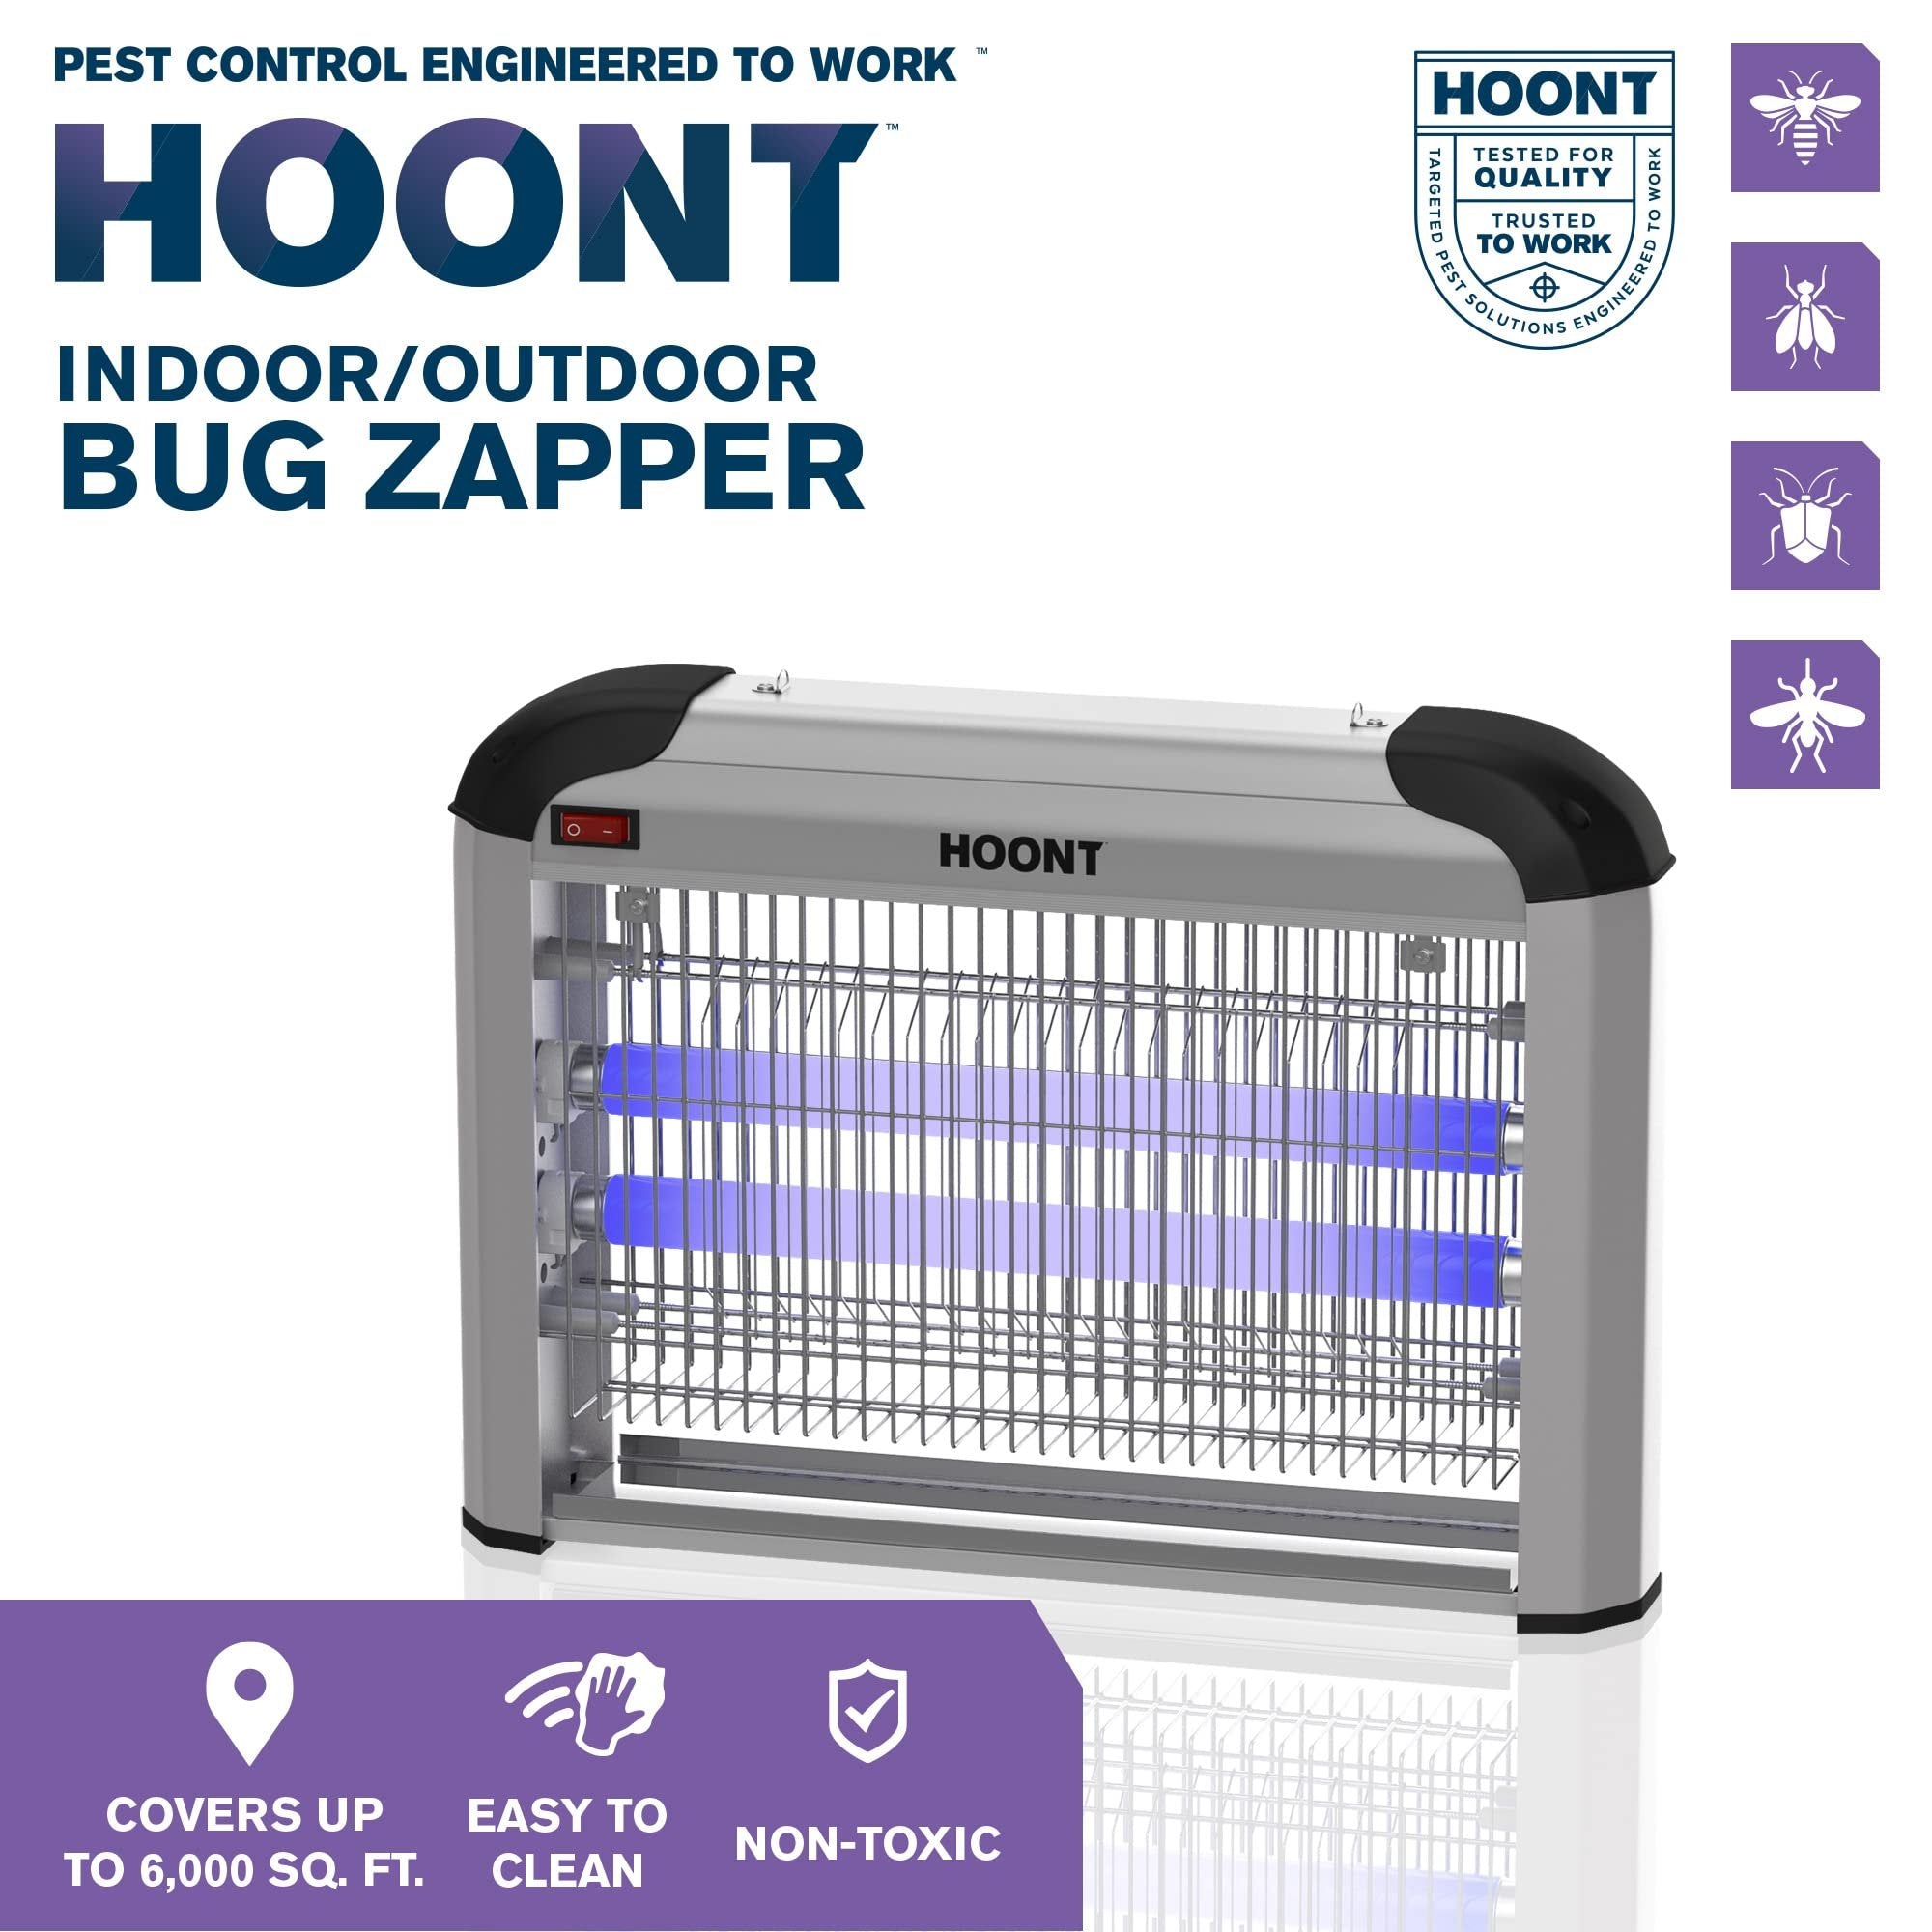 Hoont Powerful Electric Indoor Fly Zapper and Bug Zapper Trap Catcher Killer – Covers 6,000 Sq. Ft / Bug and Fly Killer, Mosquito Killer Insect Killer – For Residential and Commercial Use [UPGRADED]